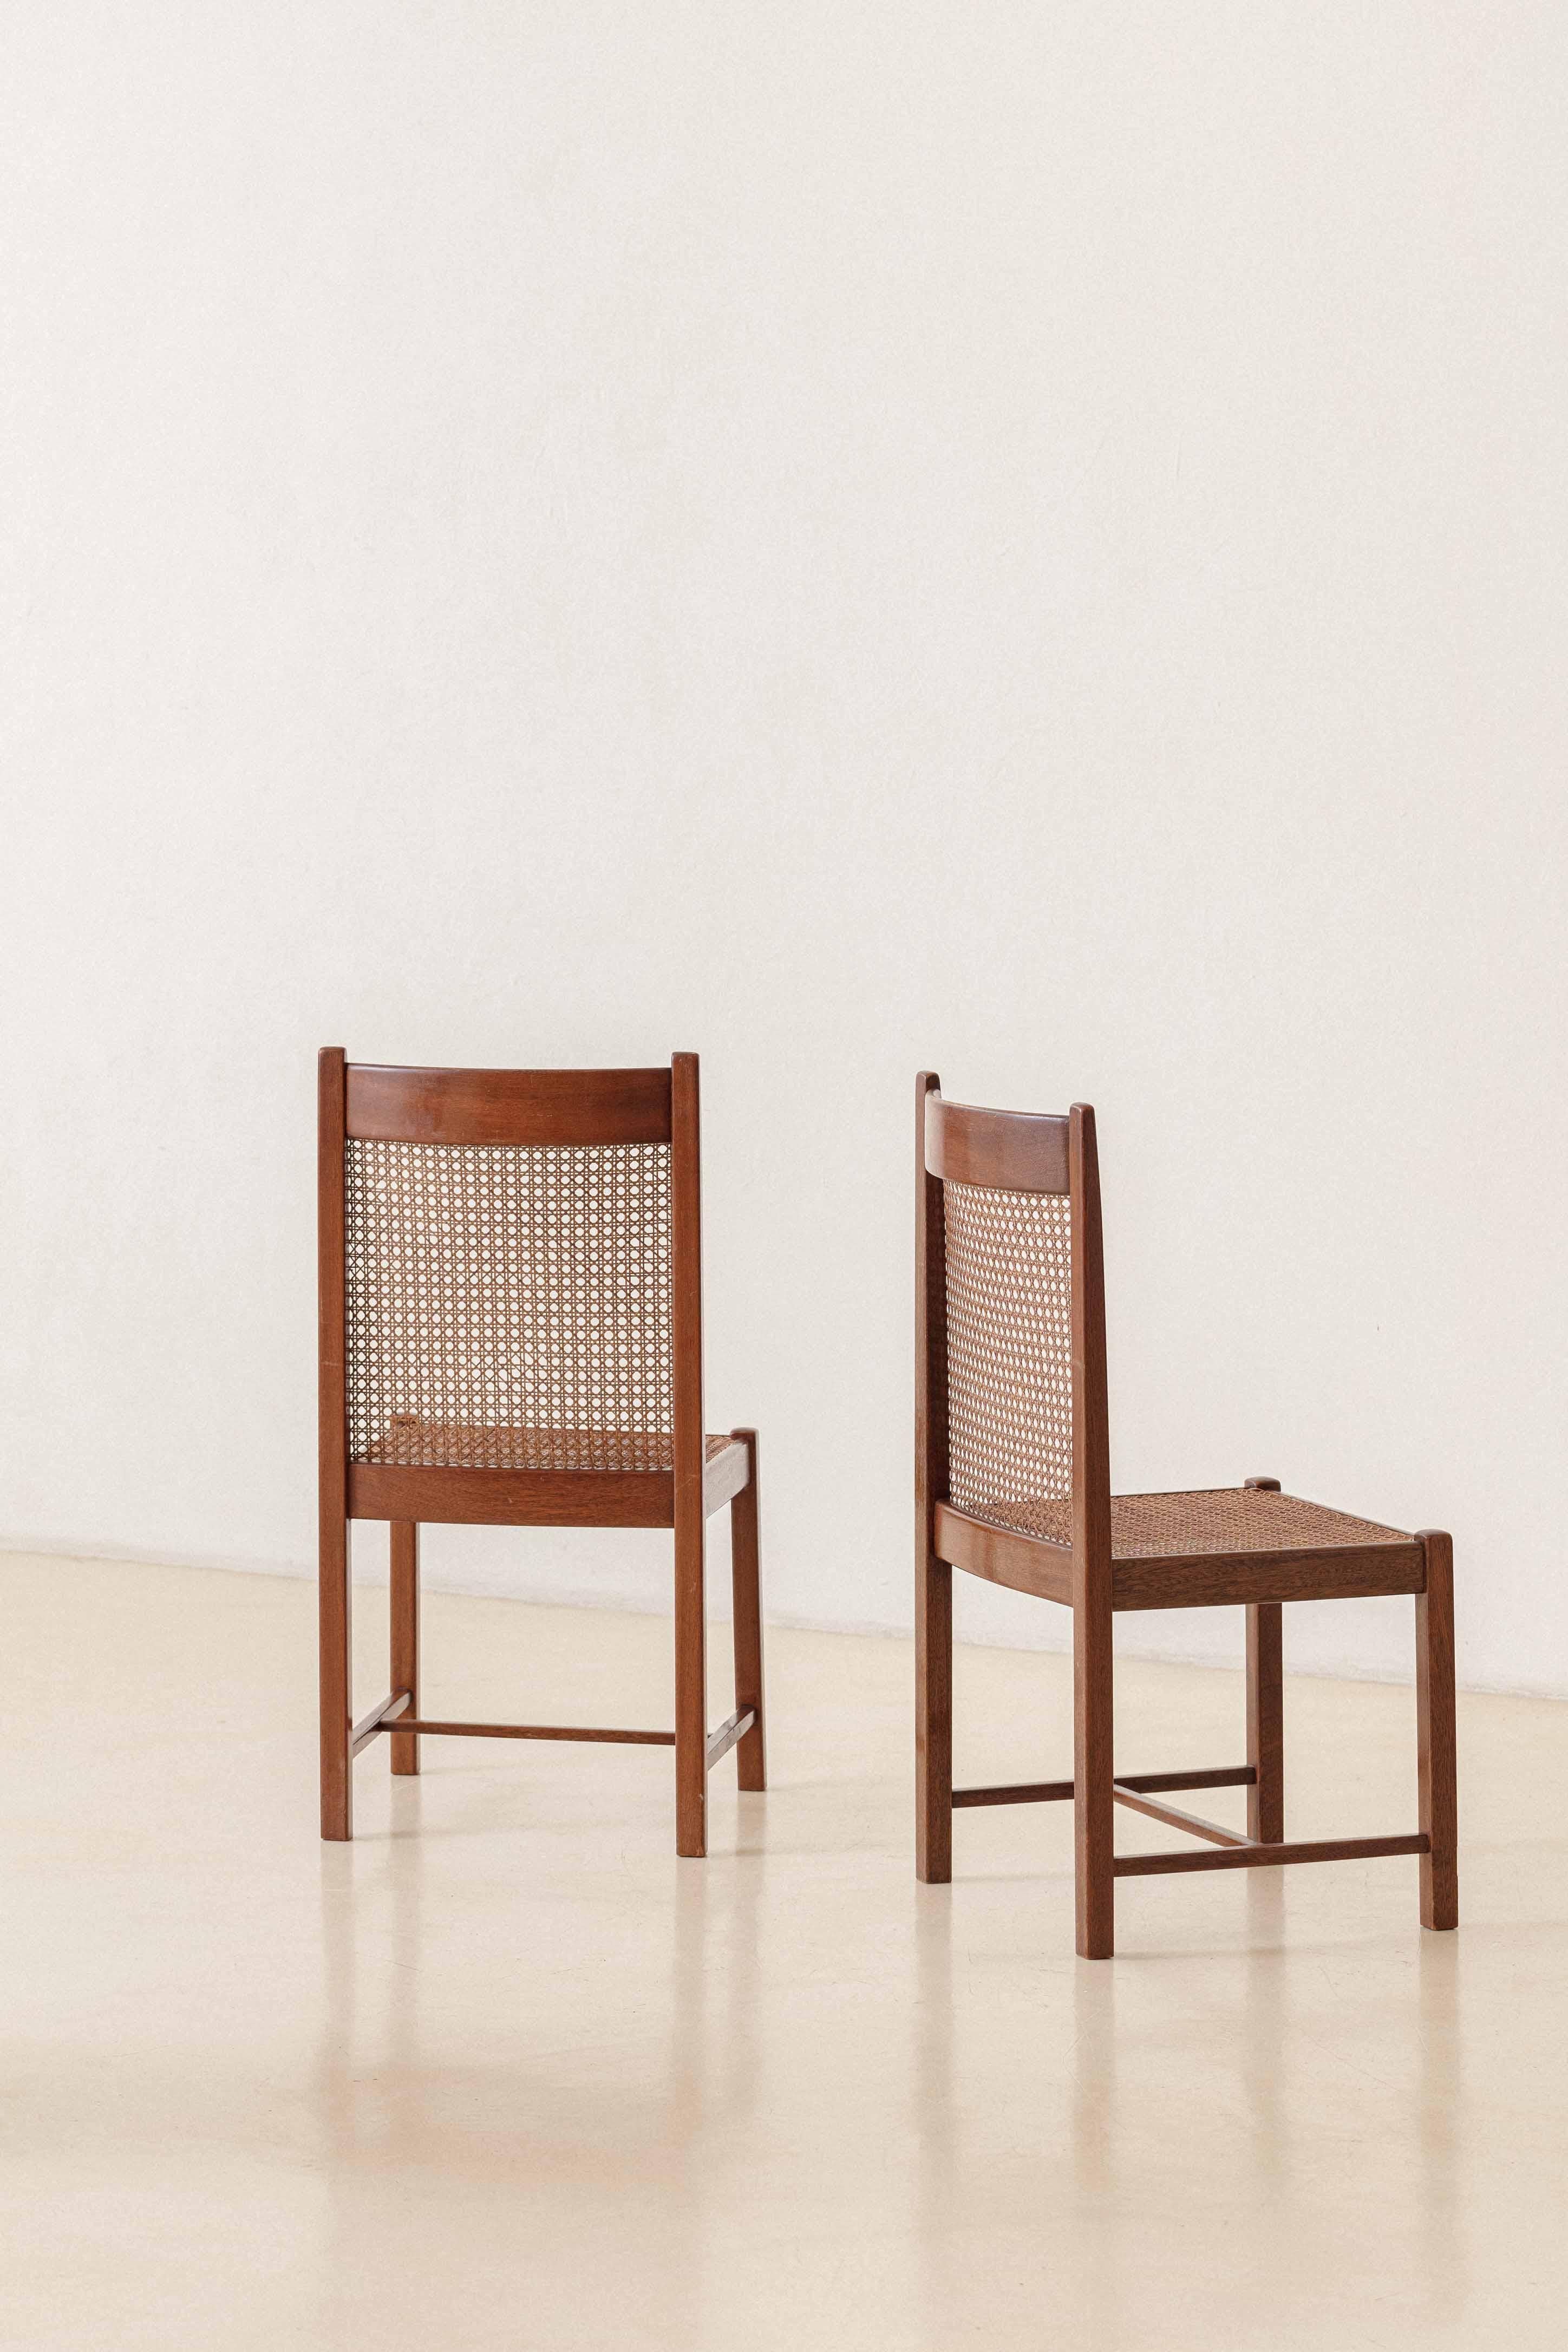 Hand-Woven Brazilian Rosewood Dining Chairs by Fatima Arquitetura Interiores 'FAI', 1960s For Sale